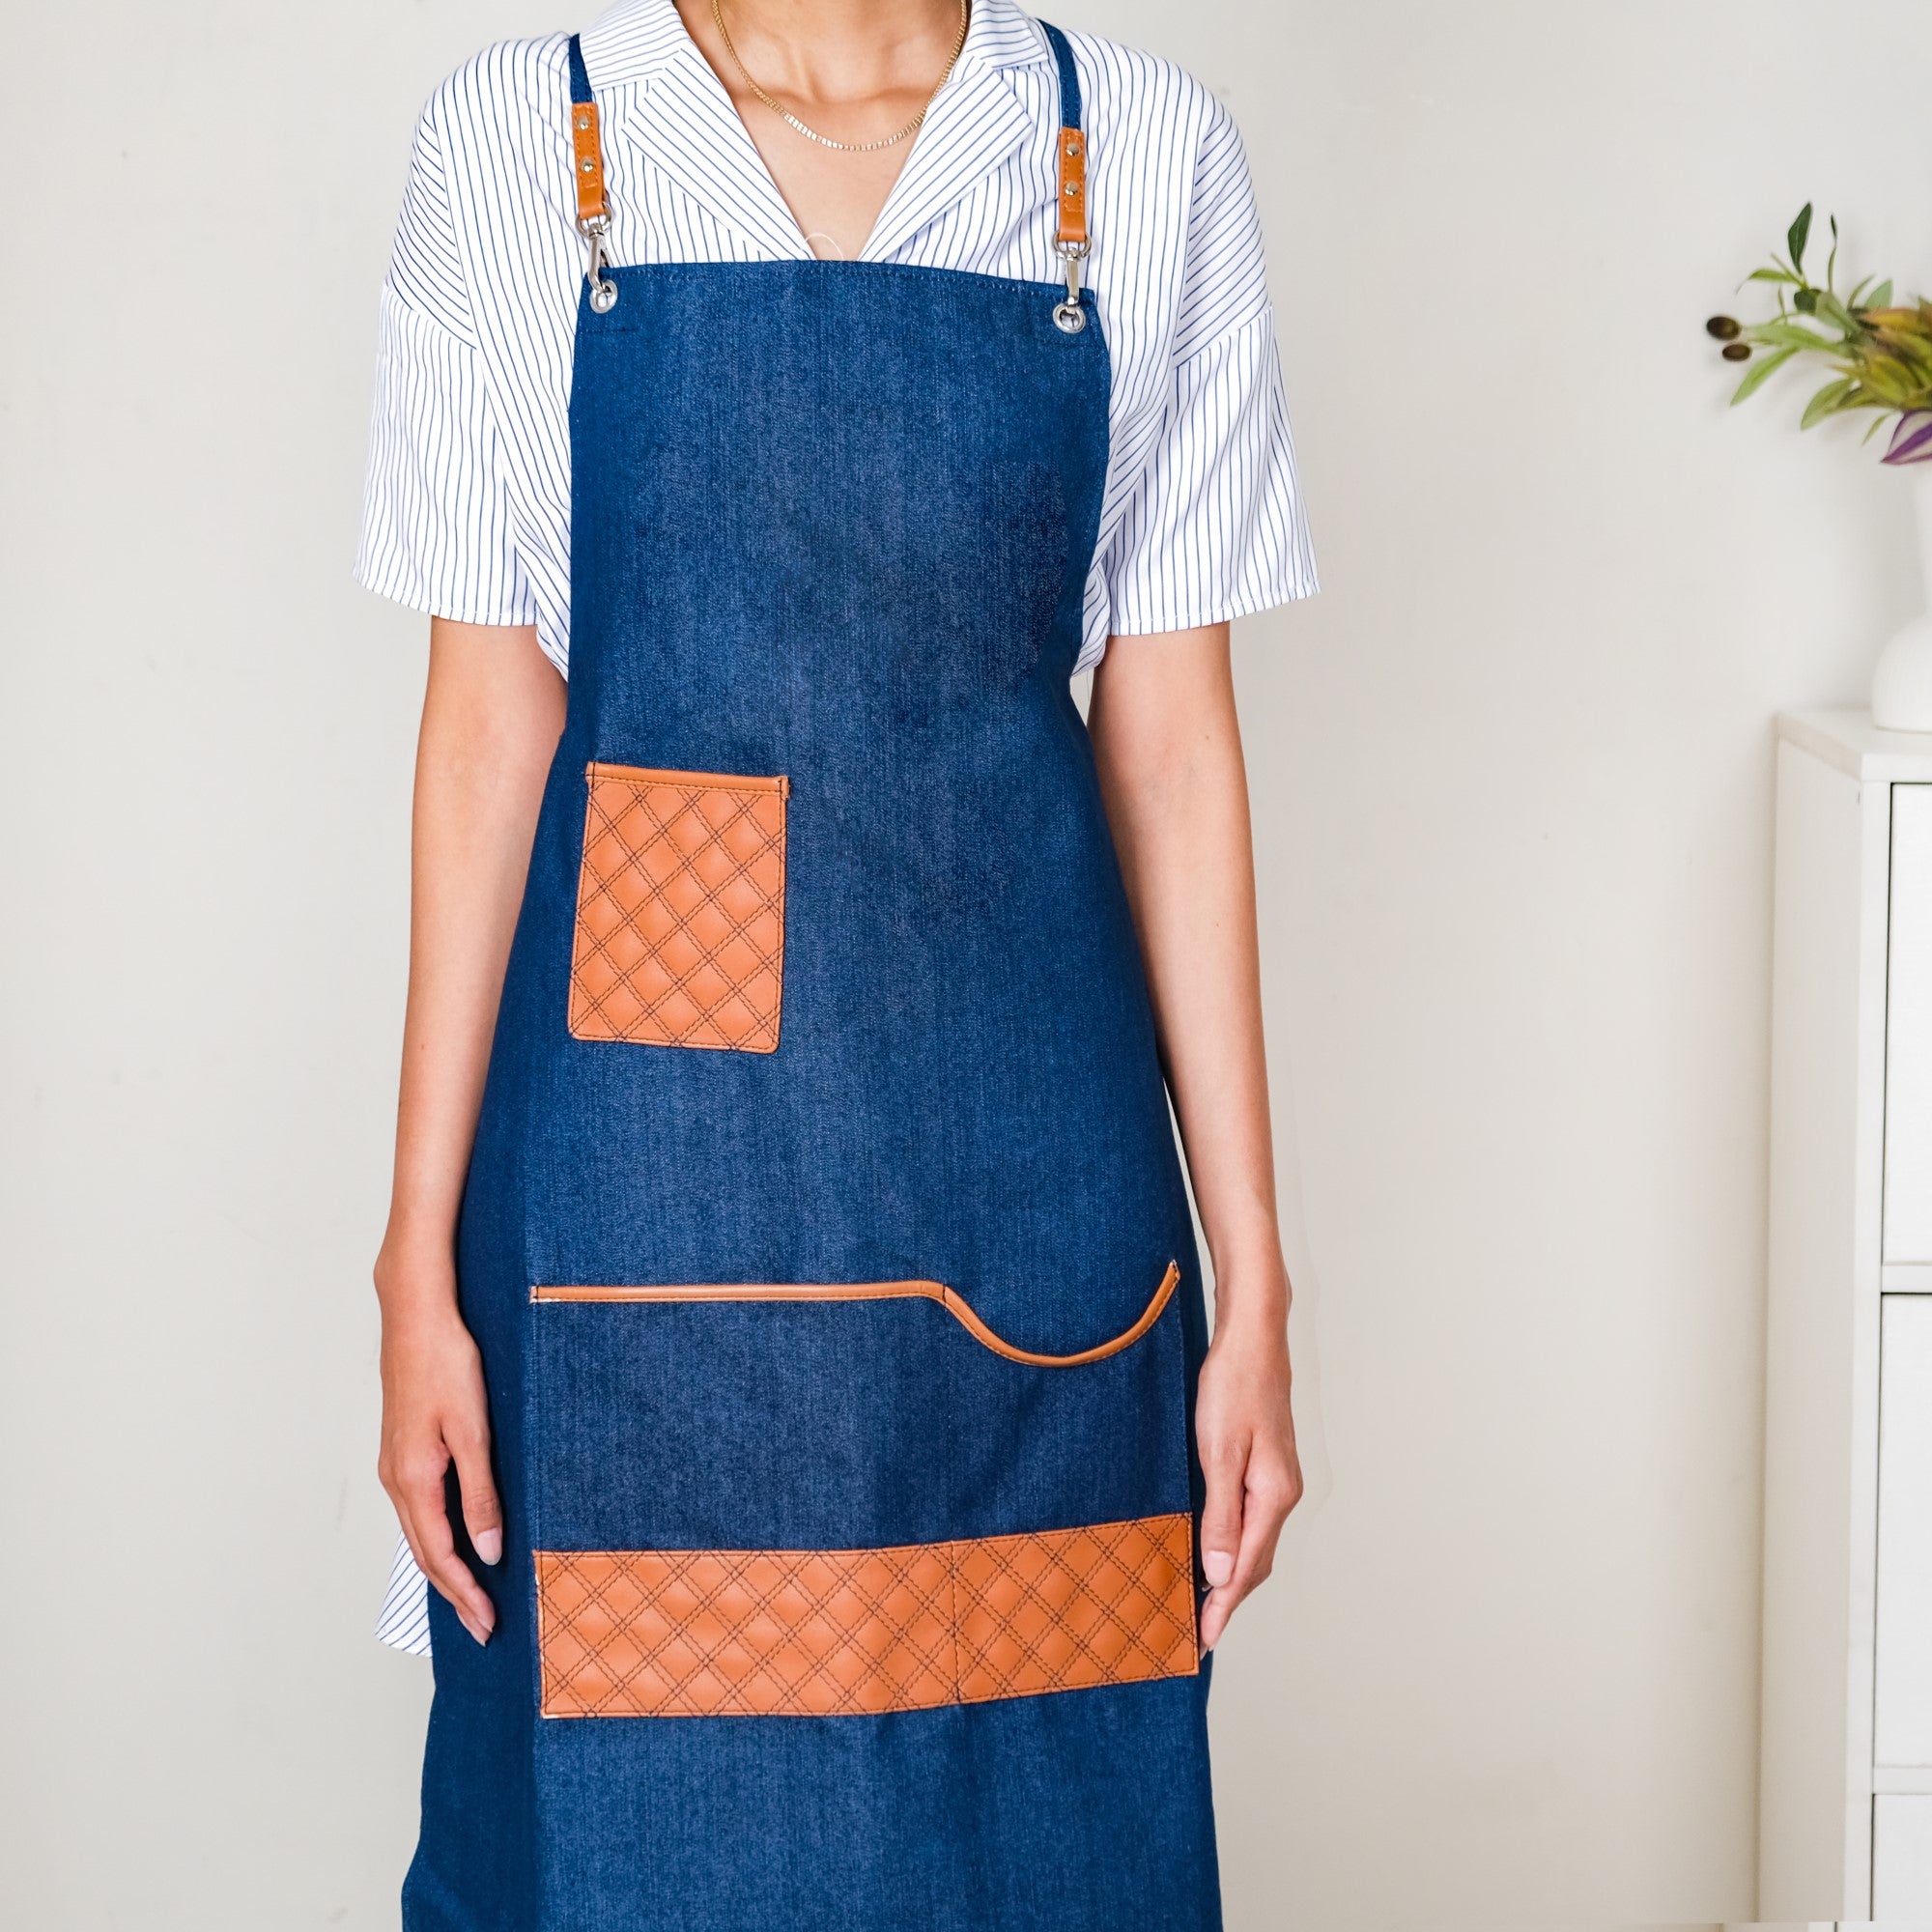 Stylish and Comfortable Gray Denim Apron, With Adjustable Leather Cross  Back Straps and Functional Pockets Custom Apron, Kitchen Apron - Etsy